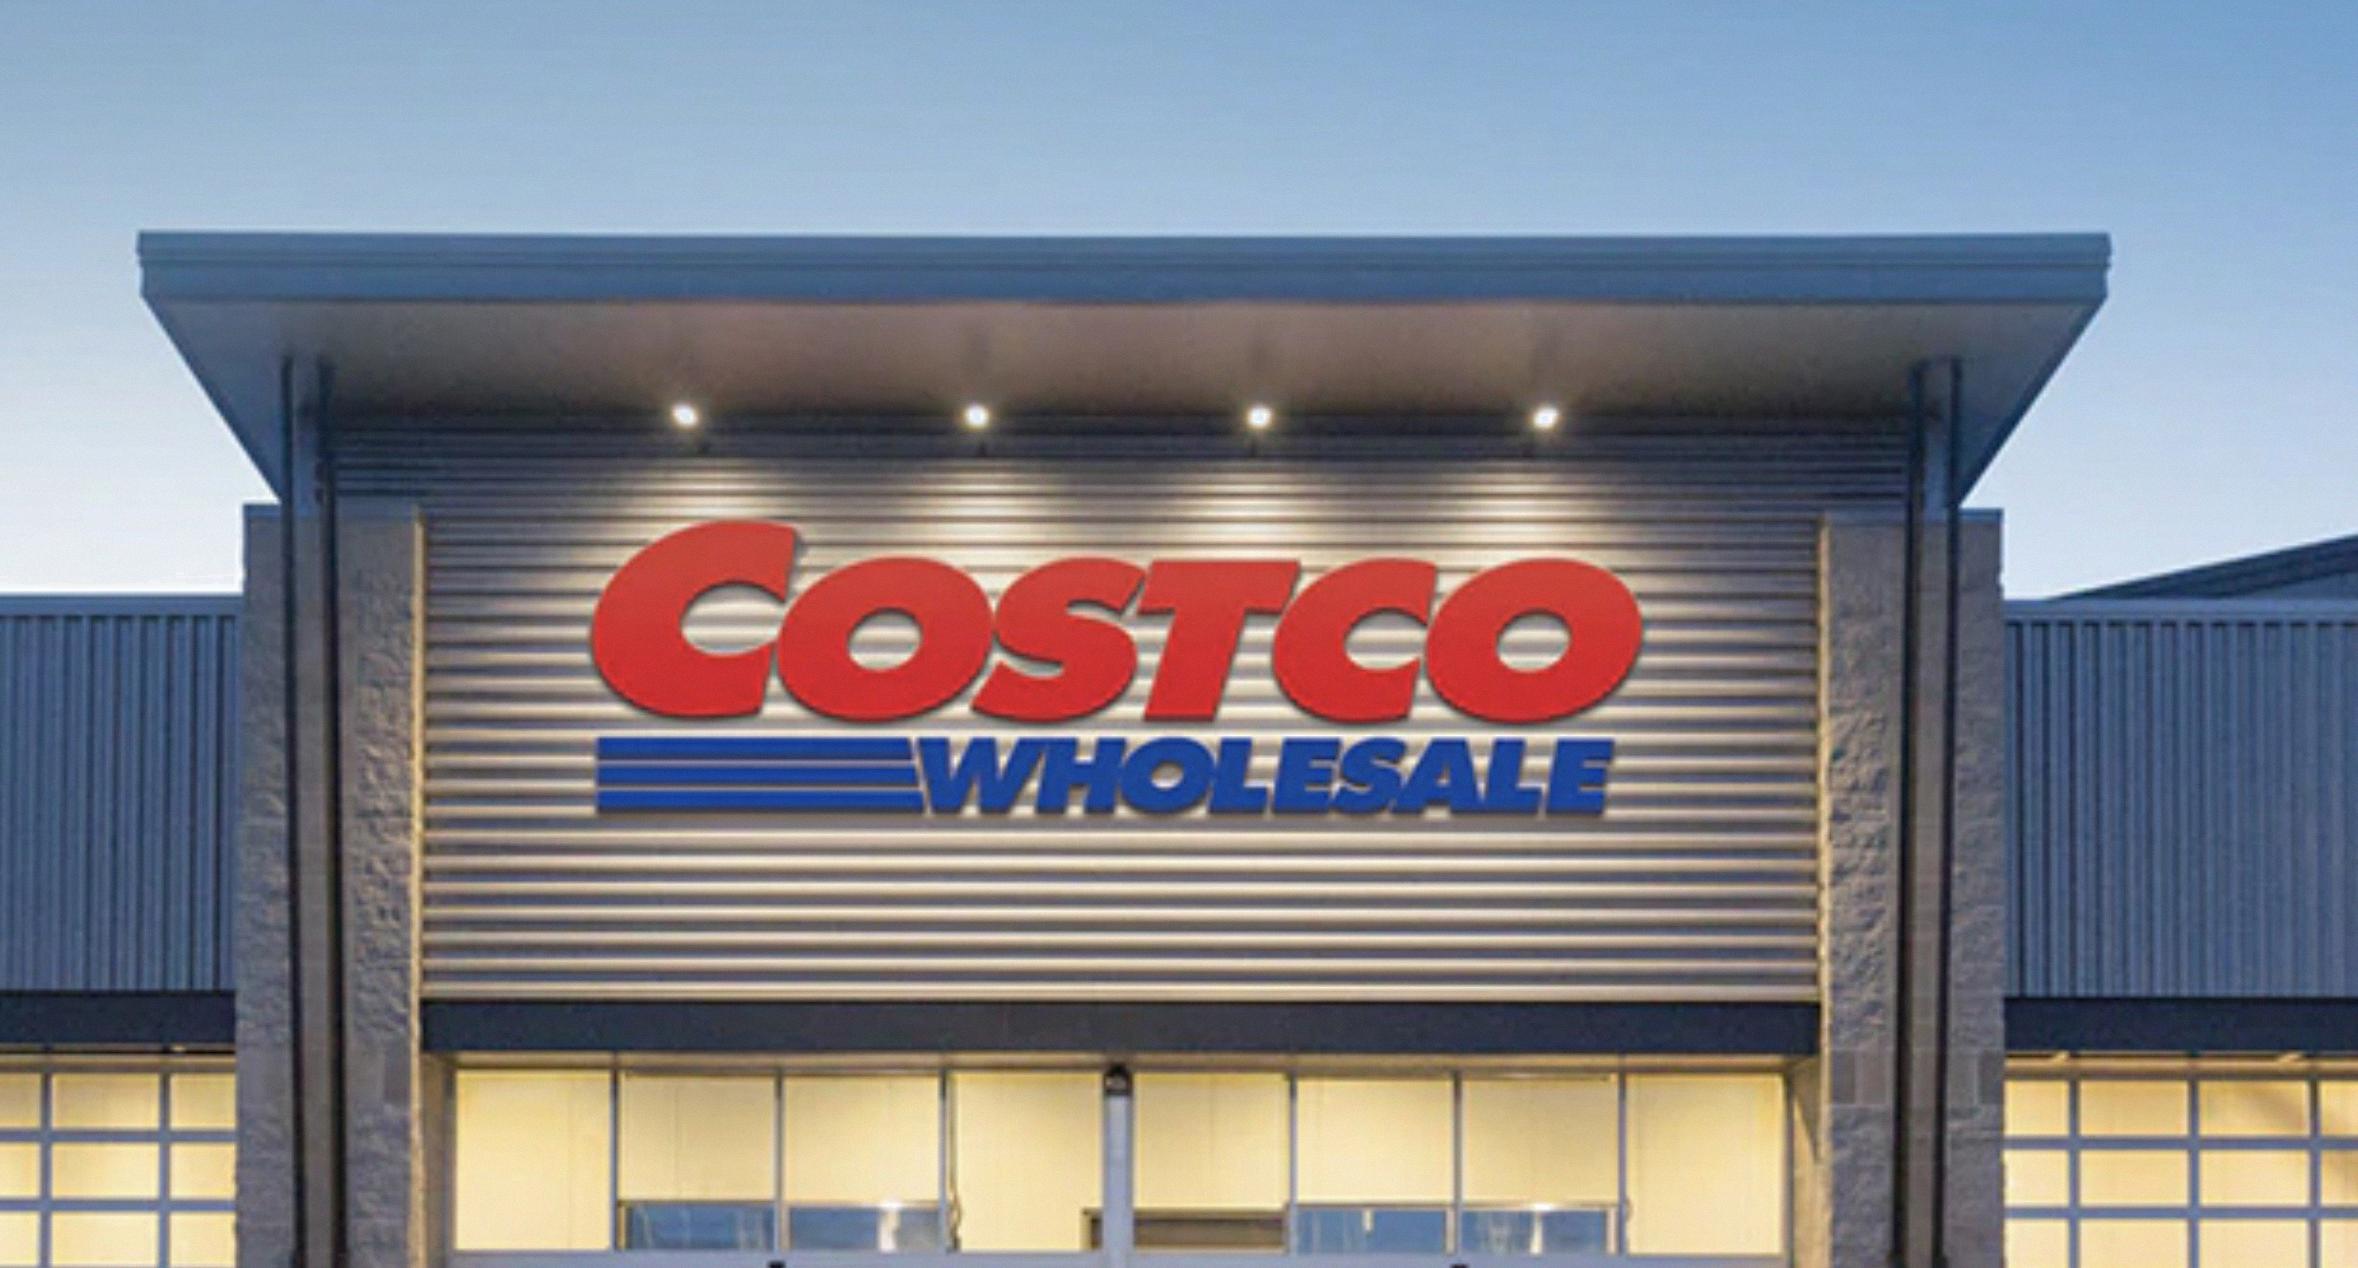 experience-costco-with-a-one-day-pass